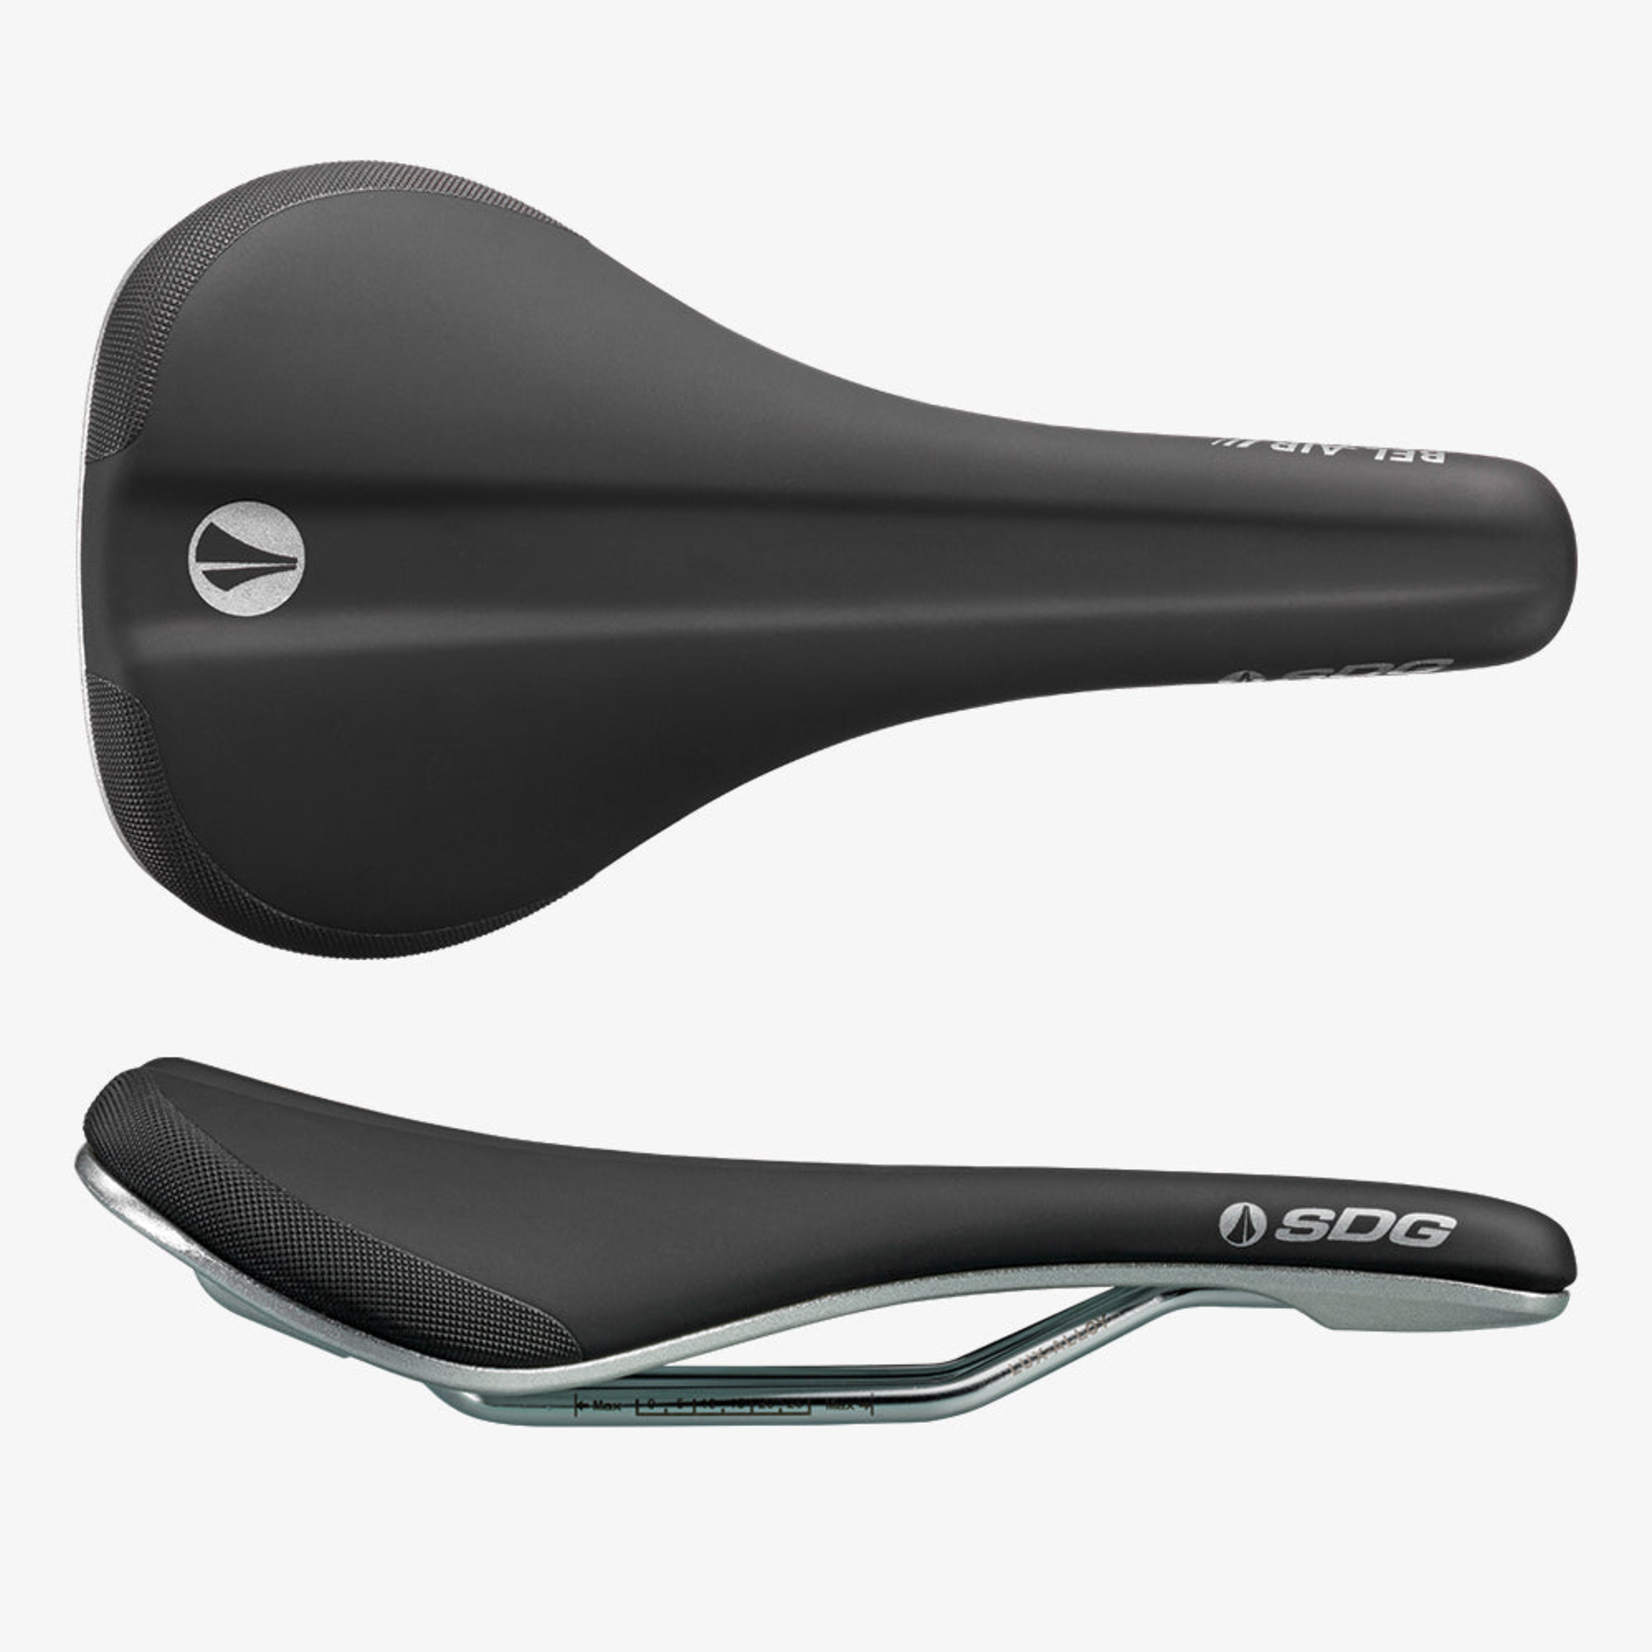 SDG SDG Bel-Air V3 Saddle - PVD Coated Lux-Alloy, Black/Silver, Sonic Welded Sides, Limited Edition Galactic